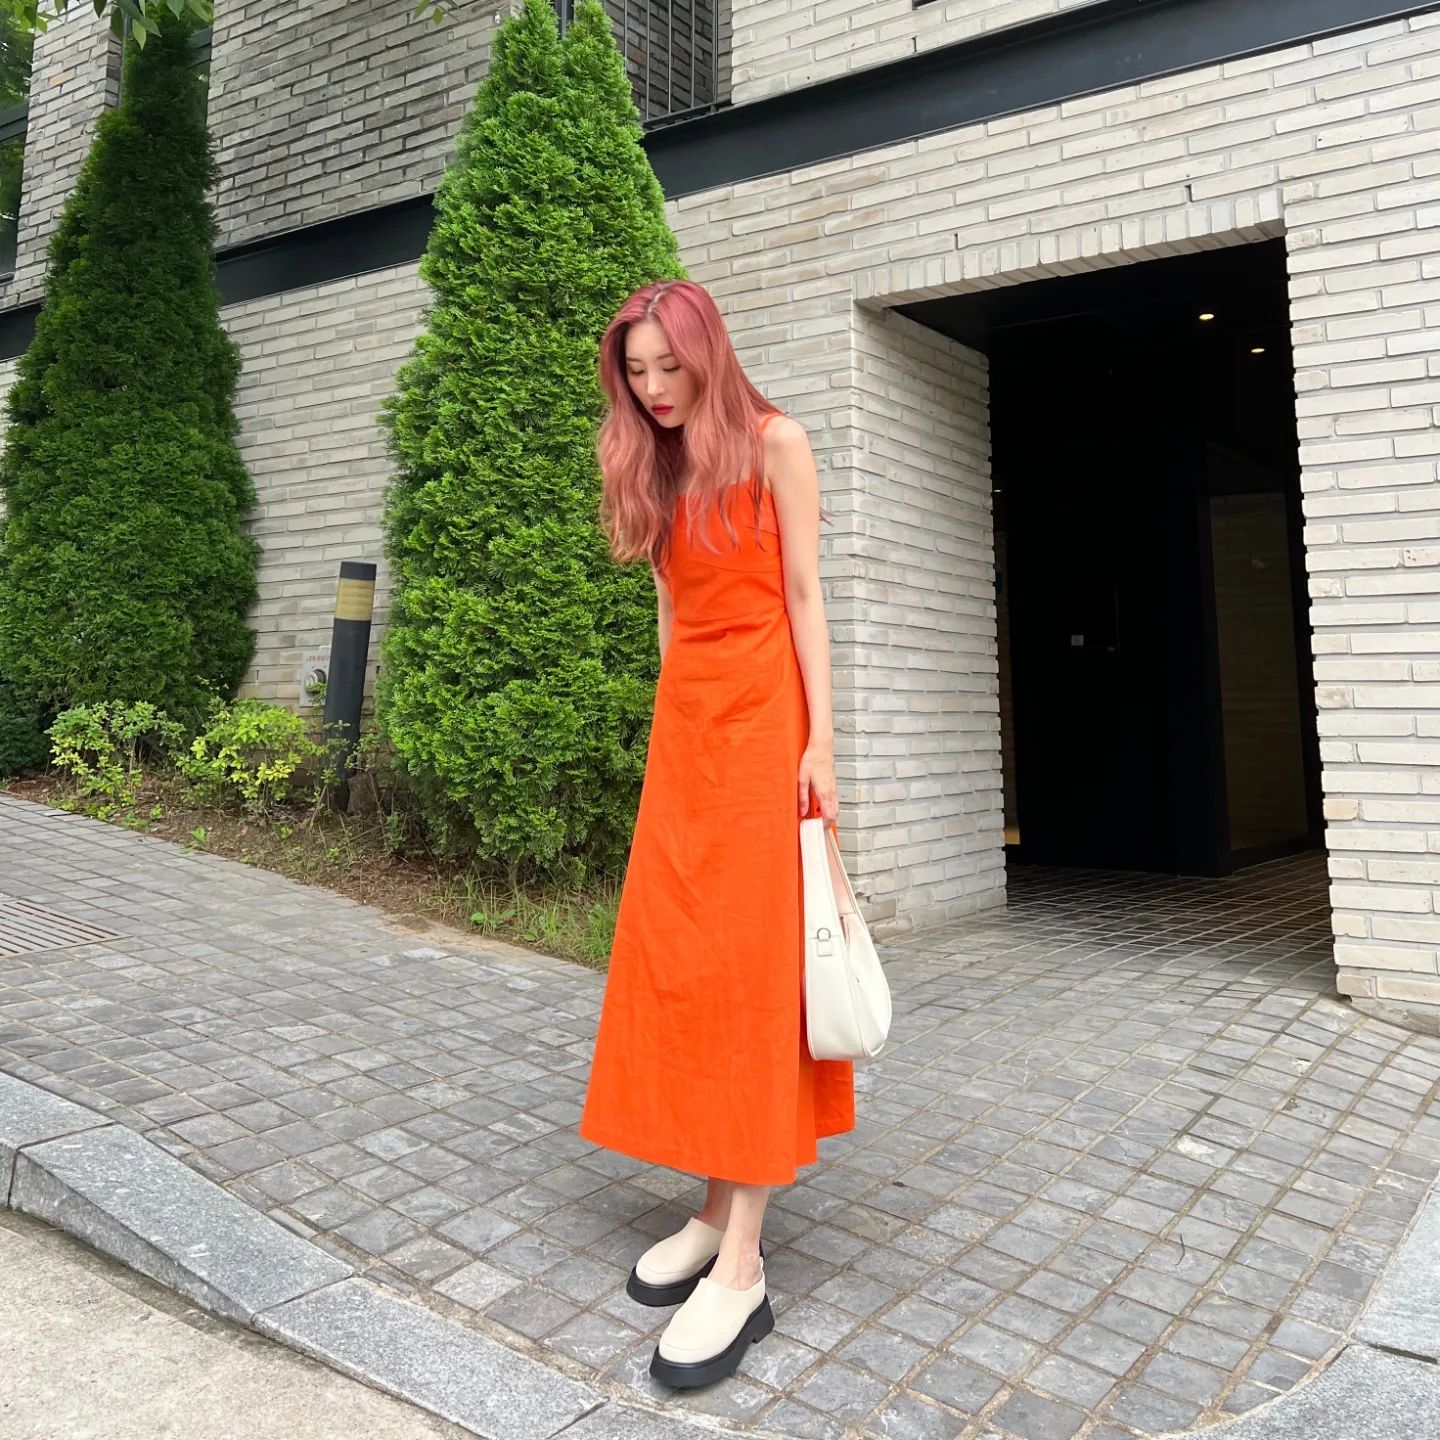 '45kg' Sunmi, nano ankles that look hard to stand